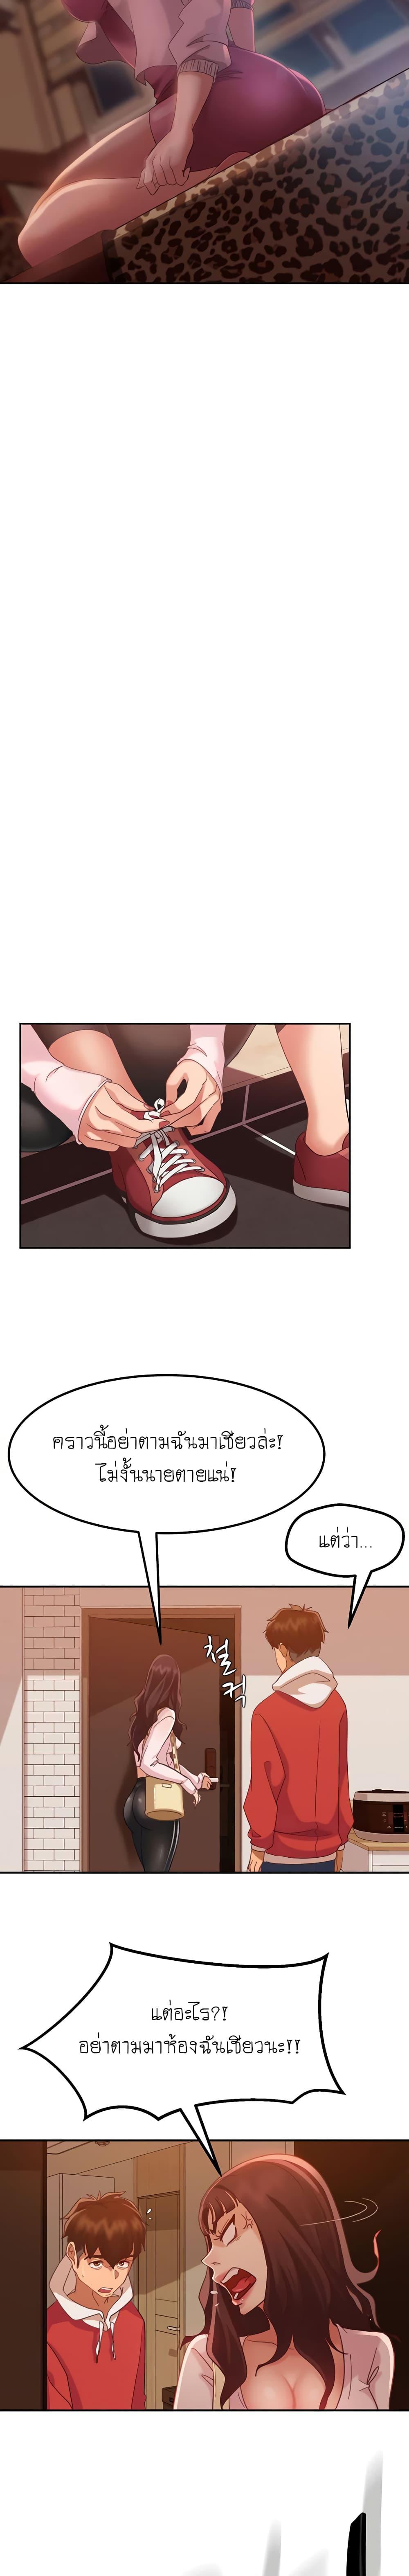 A Twisted Day 3 ภาพ 18